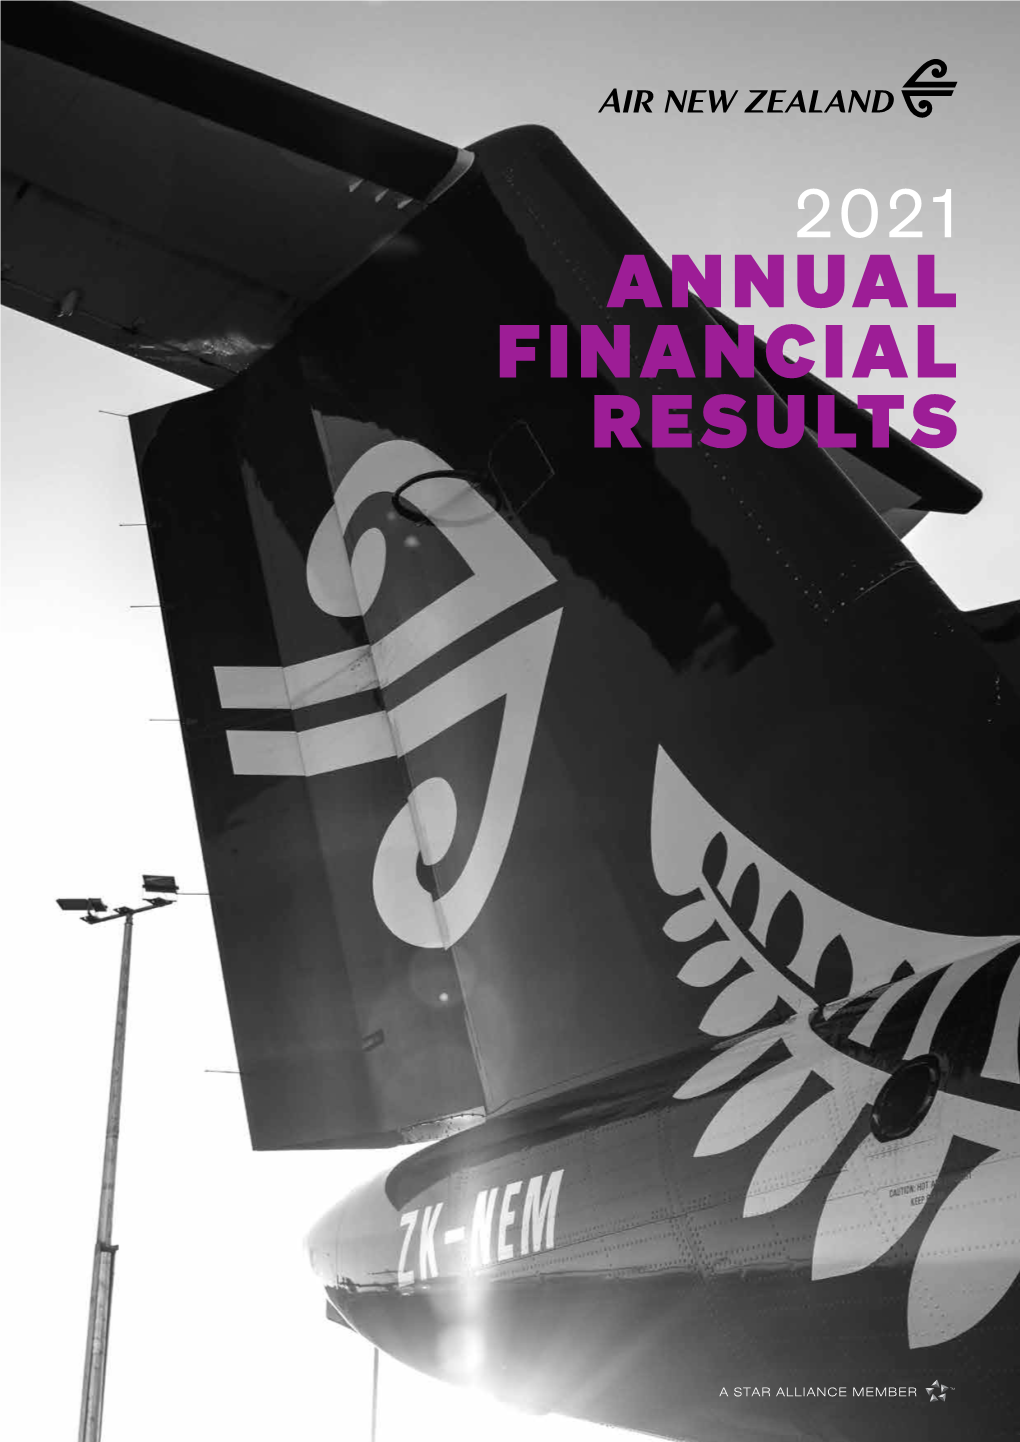 Annual Financial Results Air New Zealand Annual Financial Results 2021 Air New Zealand Annual Financial Results 2021 Air New Zealand Group